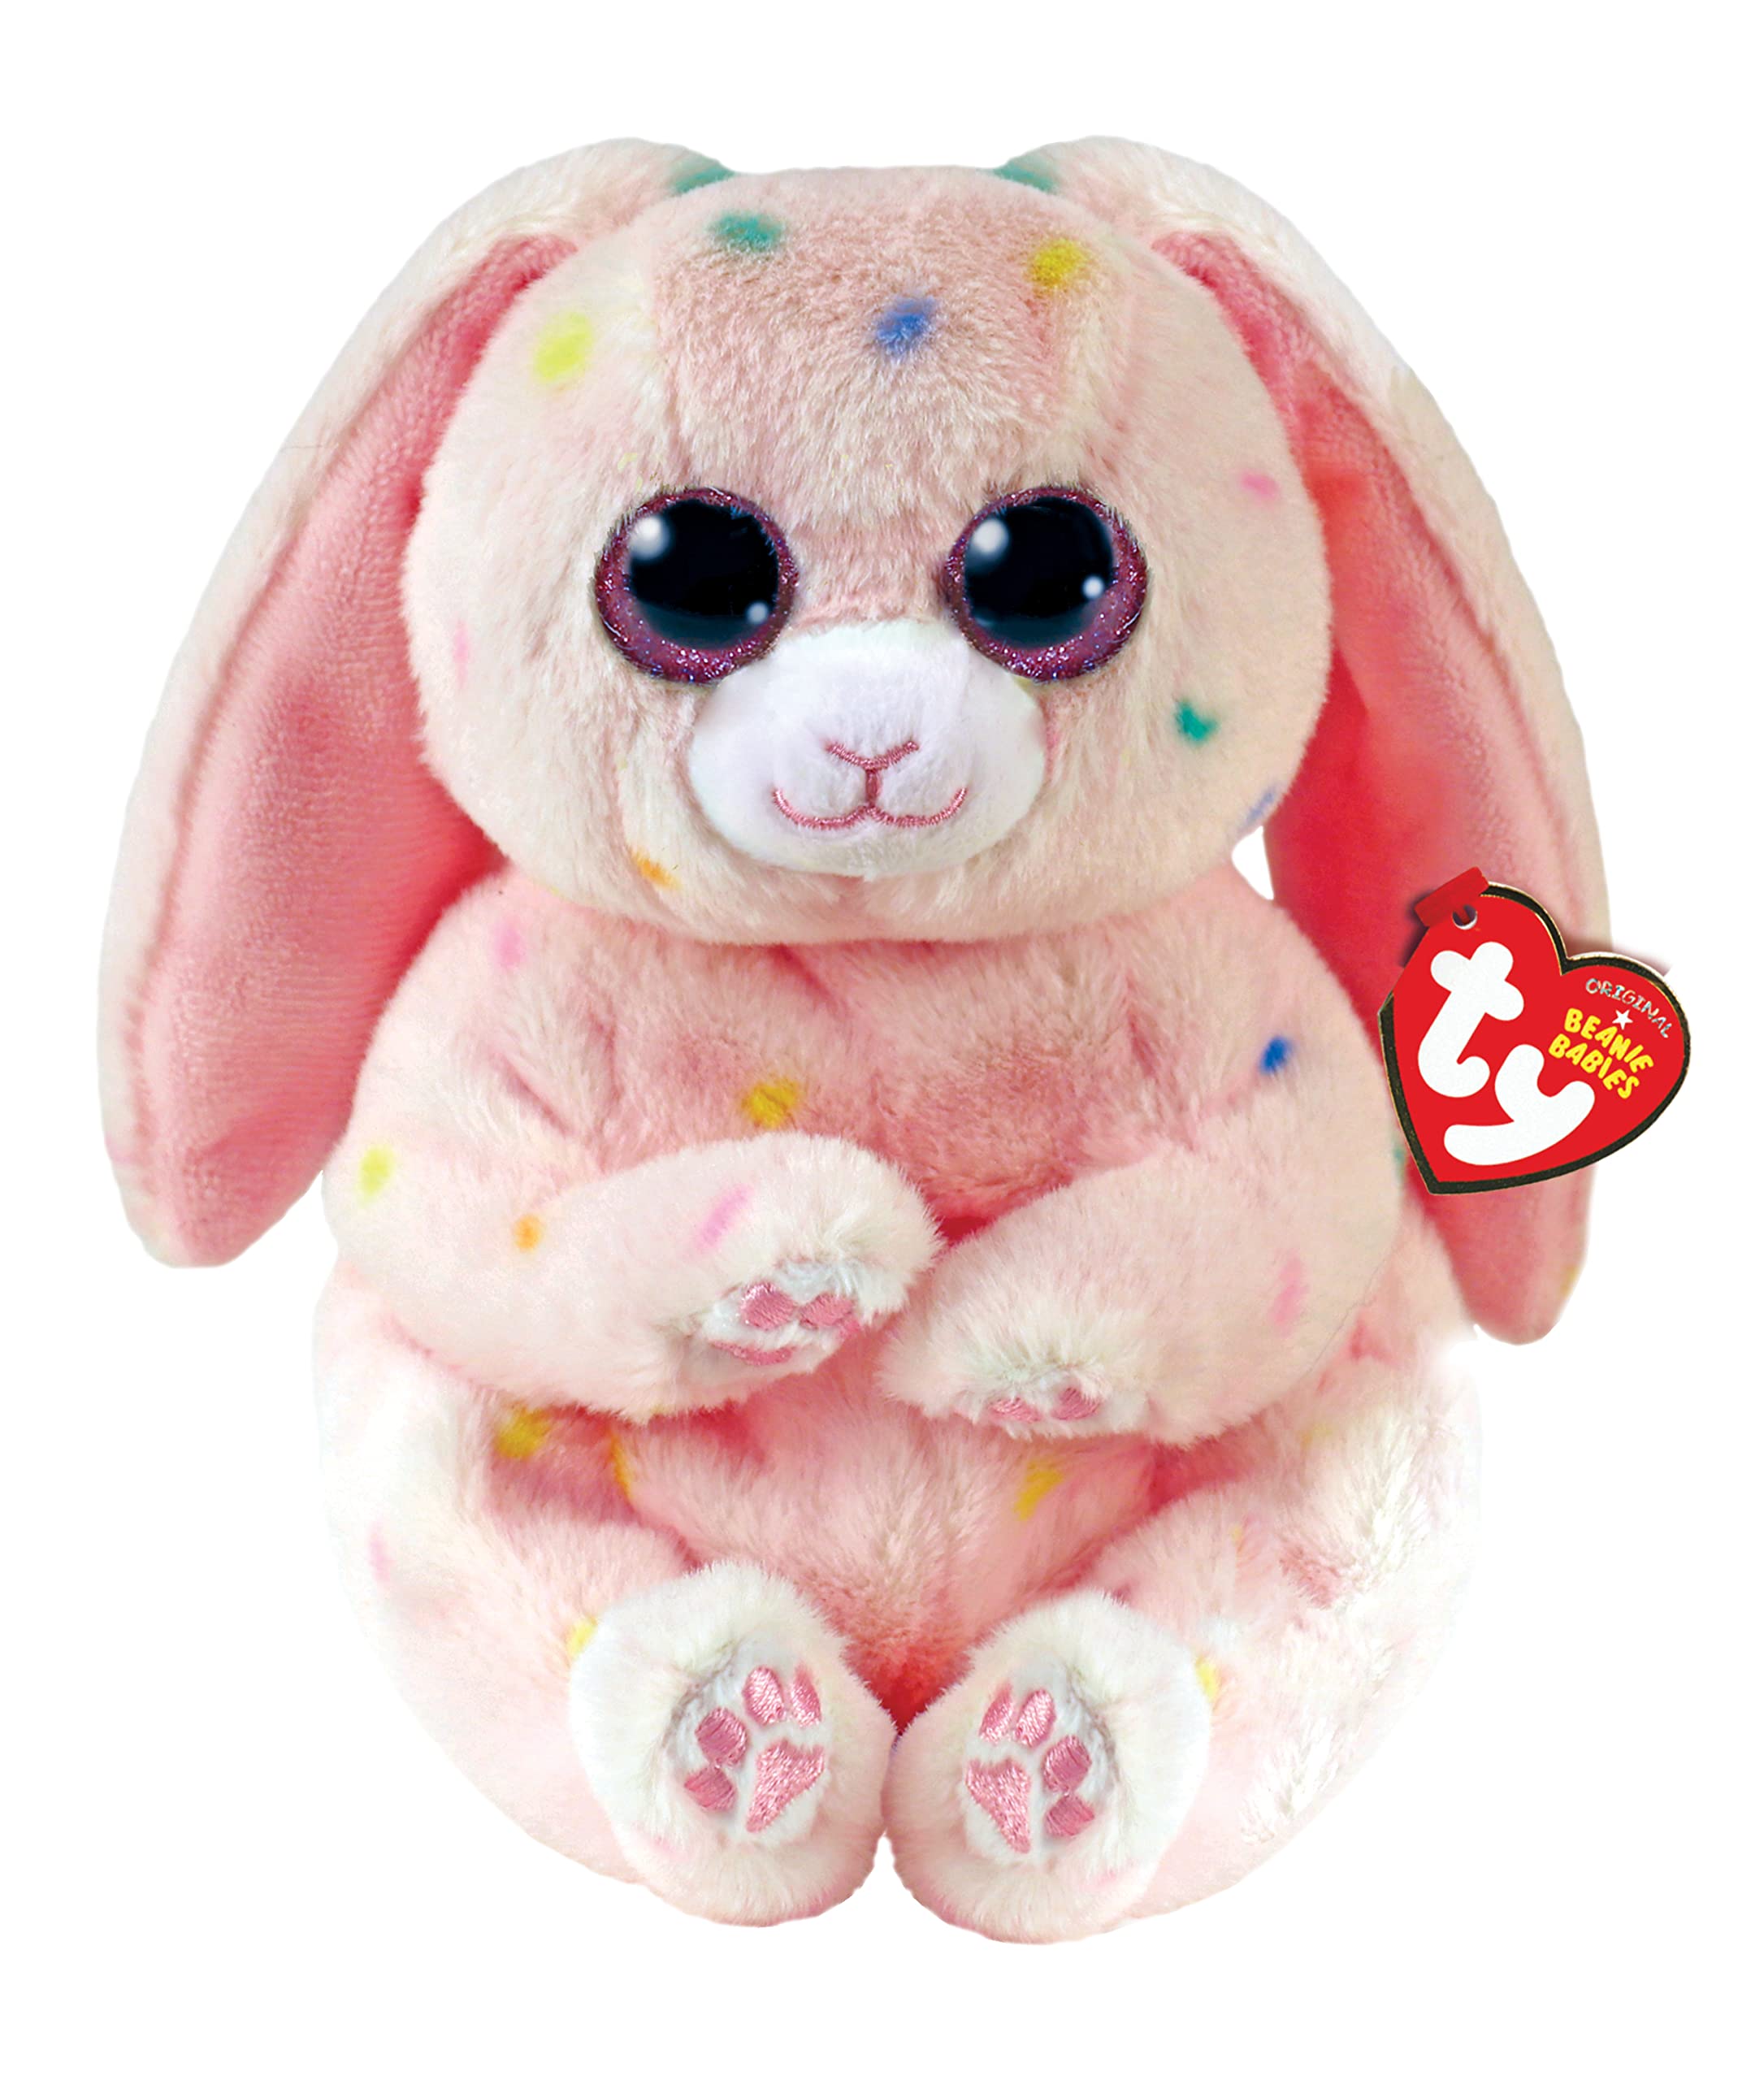 Ty Toys Beanie Babies Easter Bunny May - 15 CM, Pink, 2008716